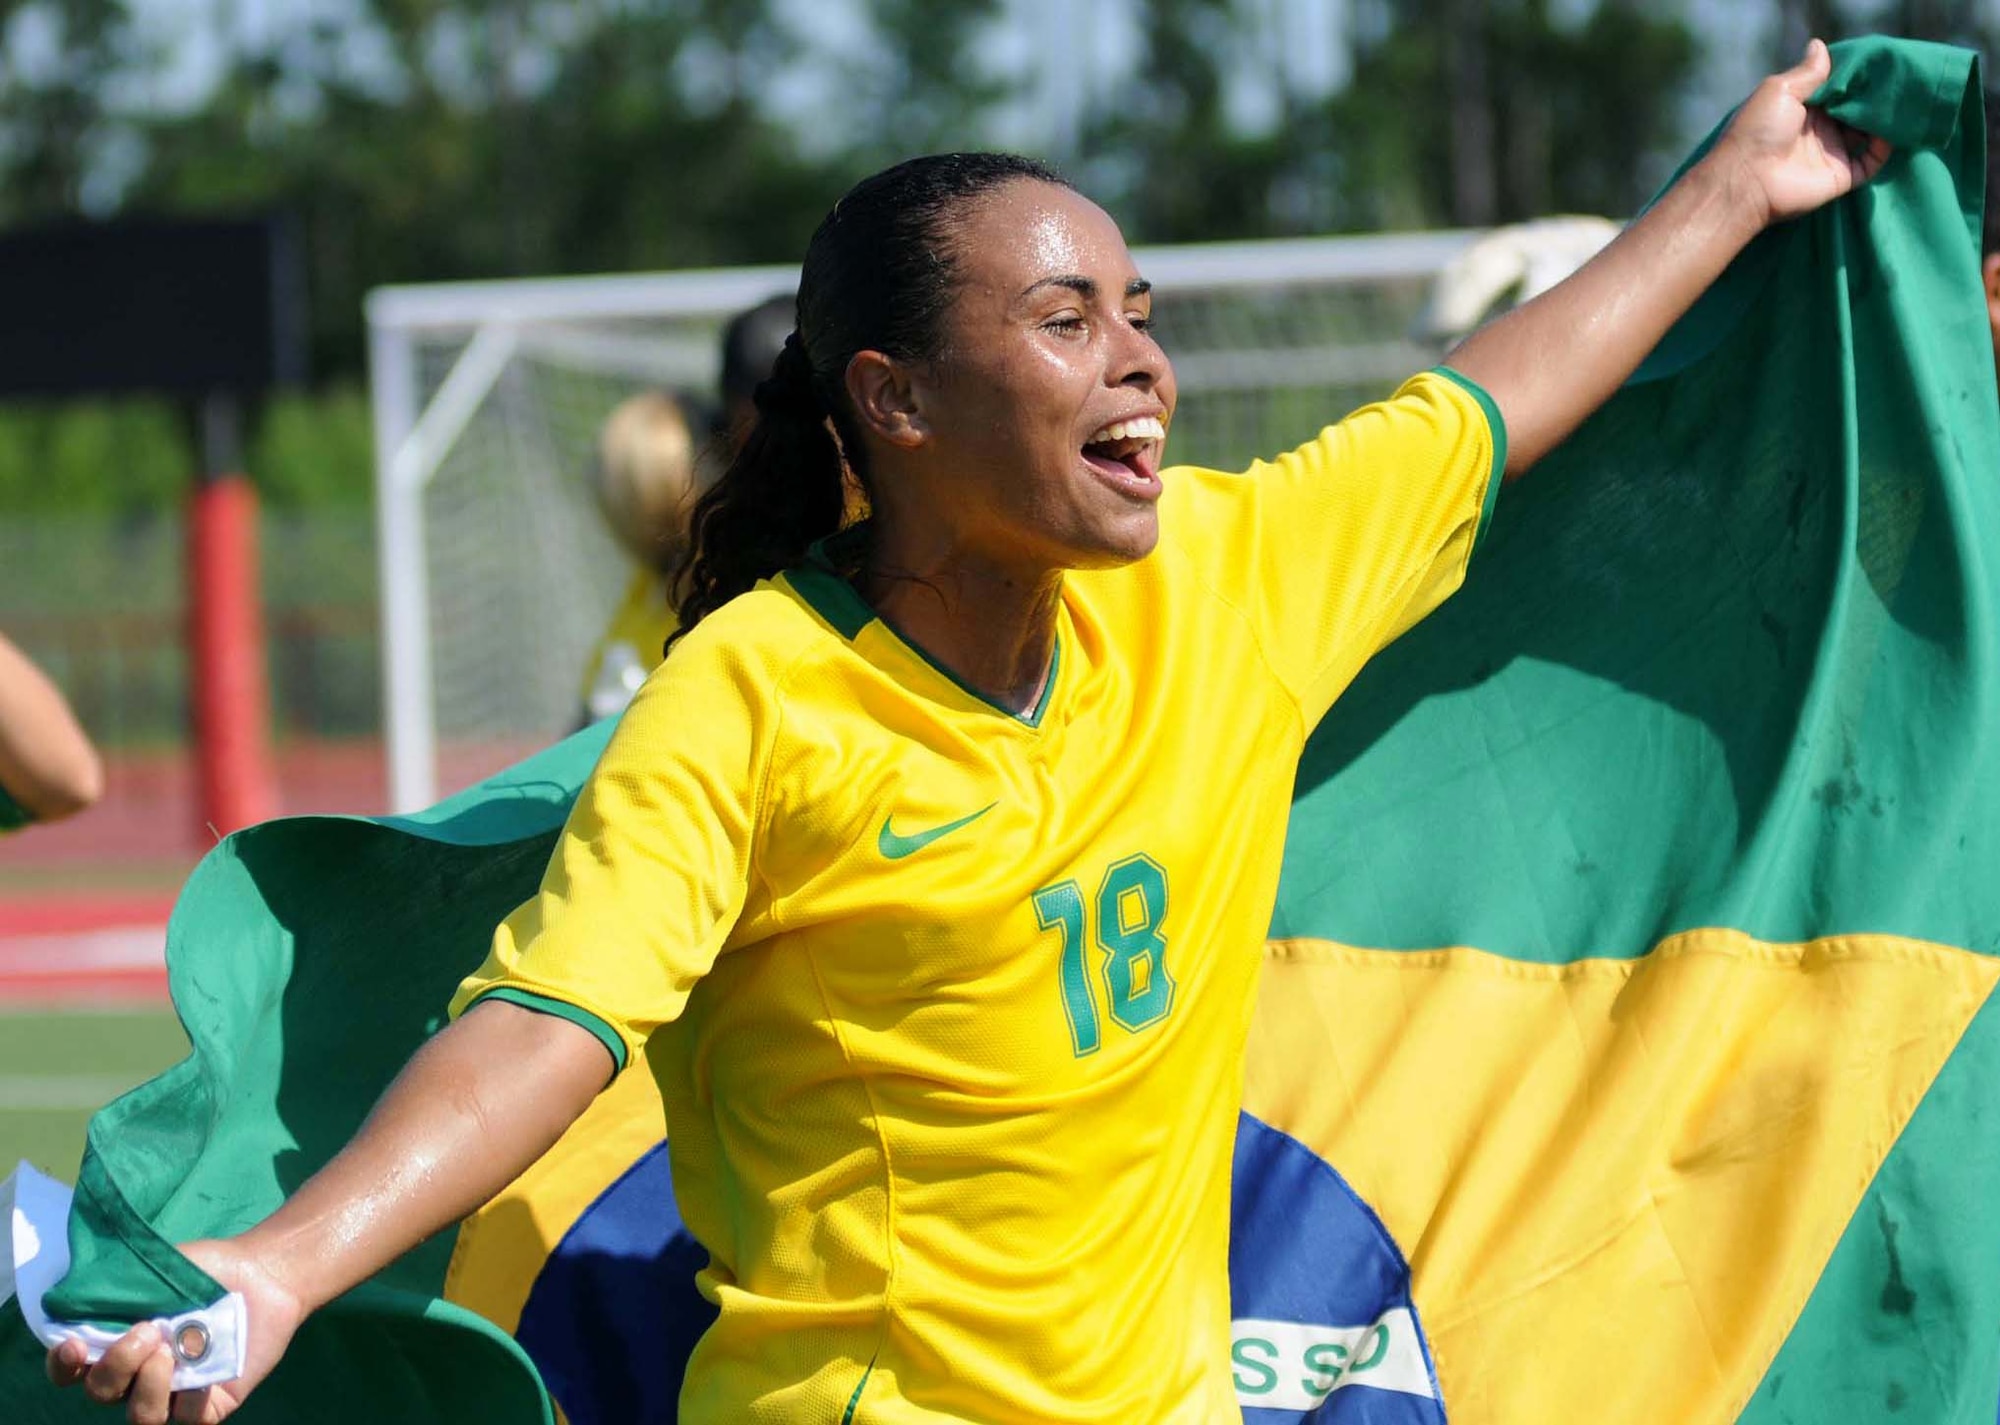 Ana Paula Silva de Frietas demonstrates her national pride after a 1-0 victory by the Brazilian team over the Republic of Korea in the championship game of the Counseil du International Sports Militaire Women’s Soccer championship tournament, Saturday at Biloxi High Stadium.  Teams from Canada, France, Germany, The Netherlands and the United States also participated in the competition hosted by Keesler which began June 6.  (U.S. Air Force photo by Kemberly Groue)